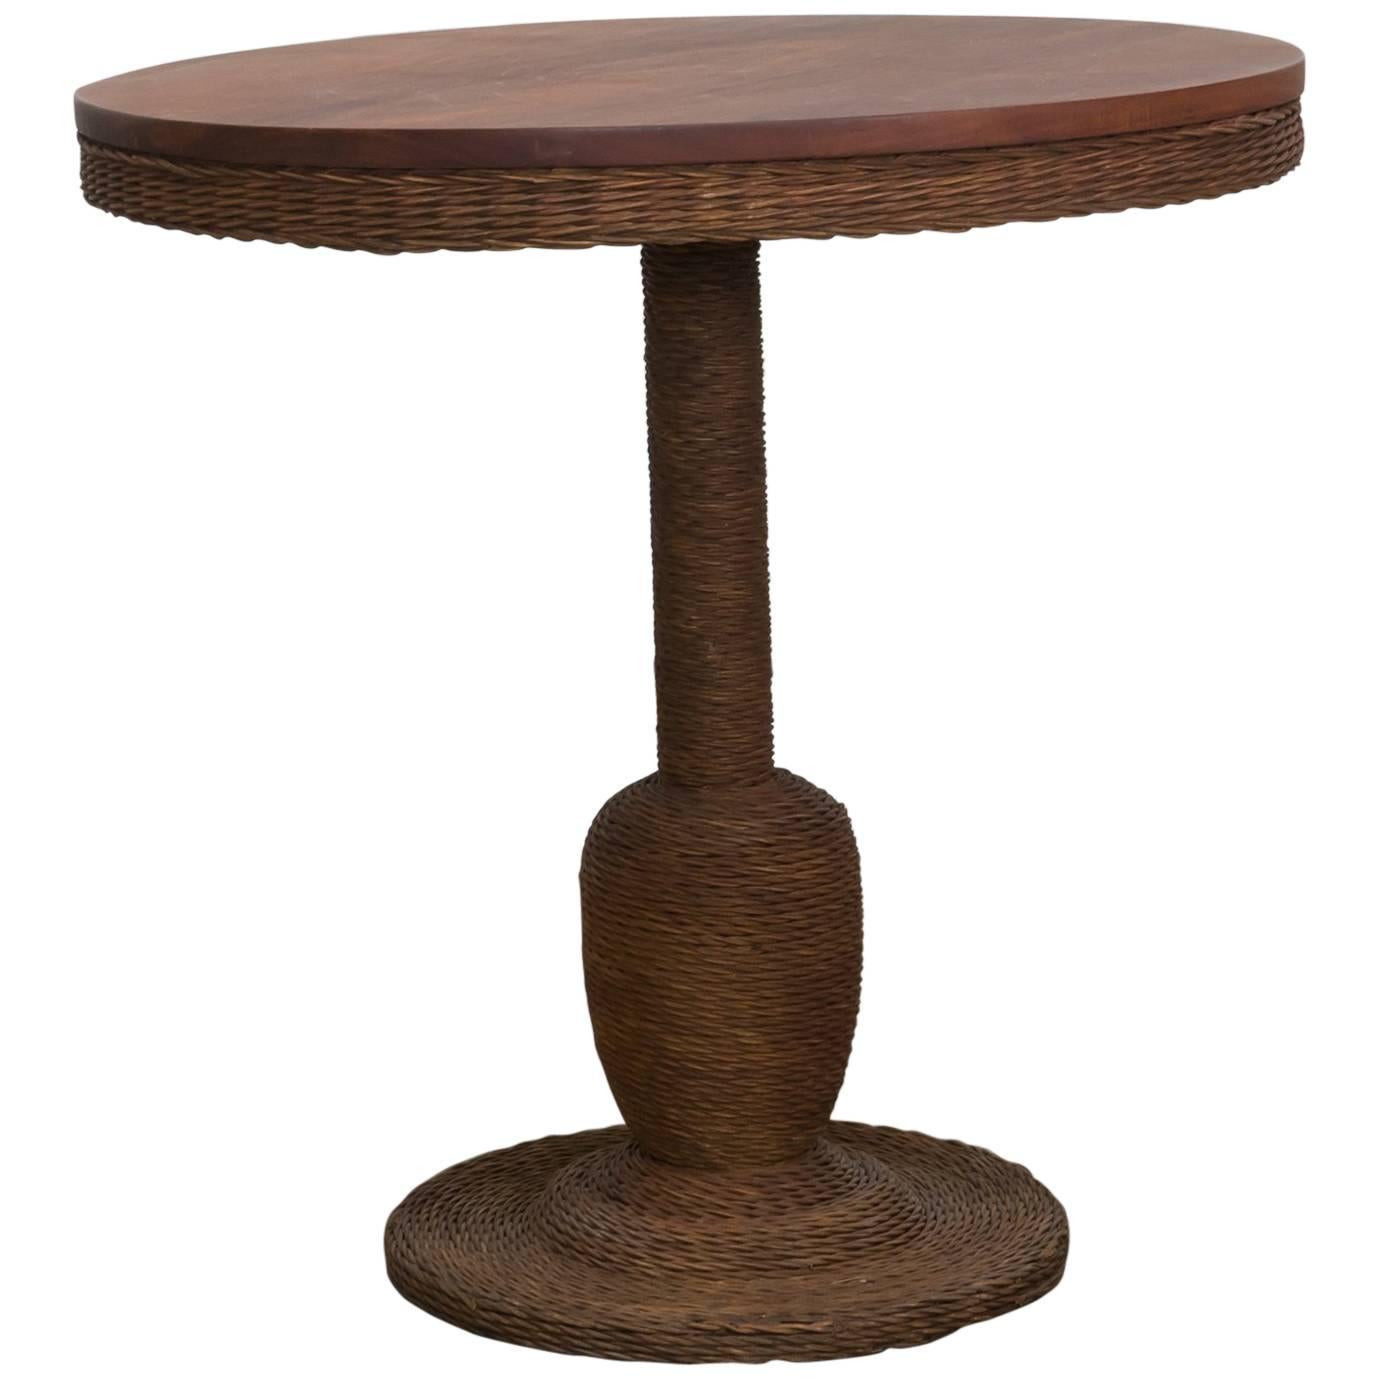 1900 American Wicker and Wood Pedestal Table